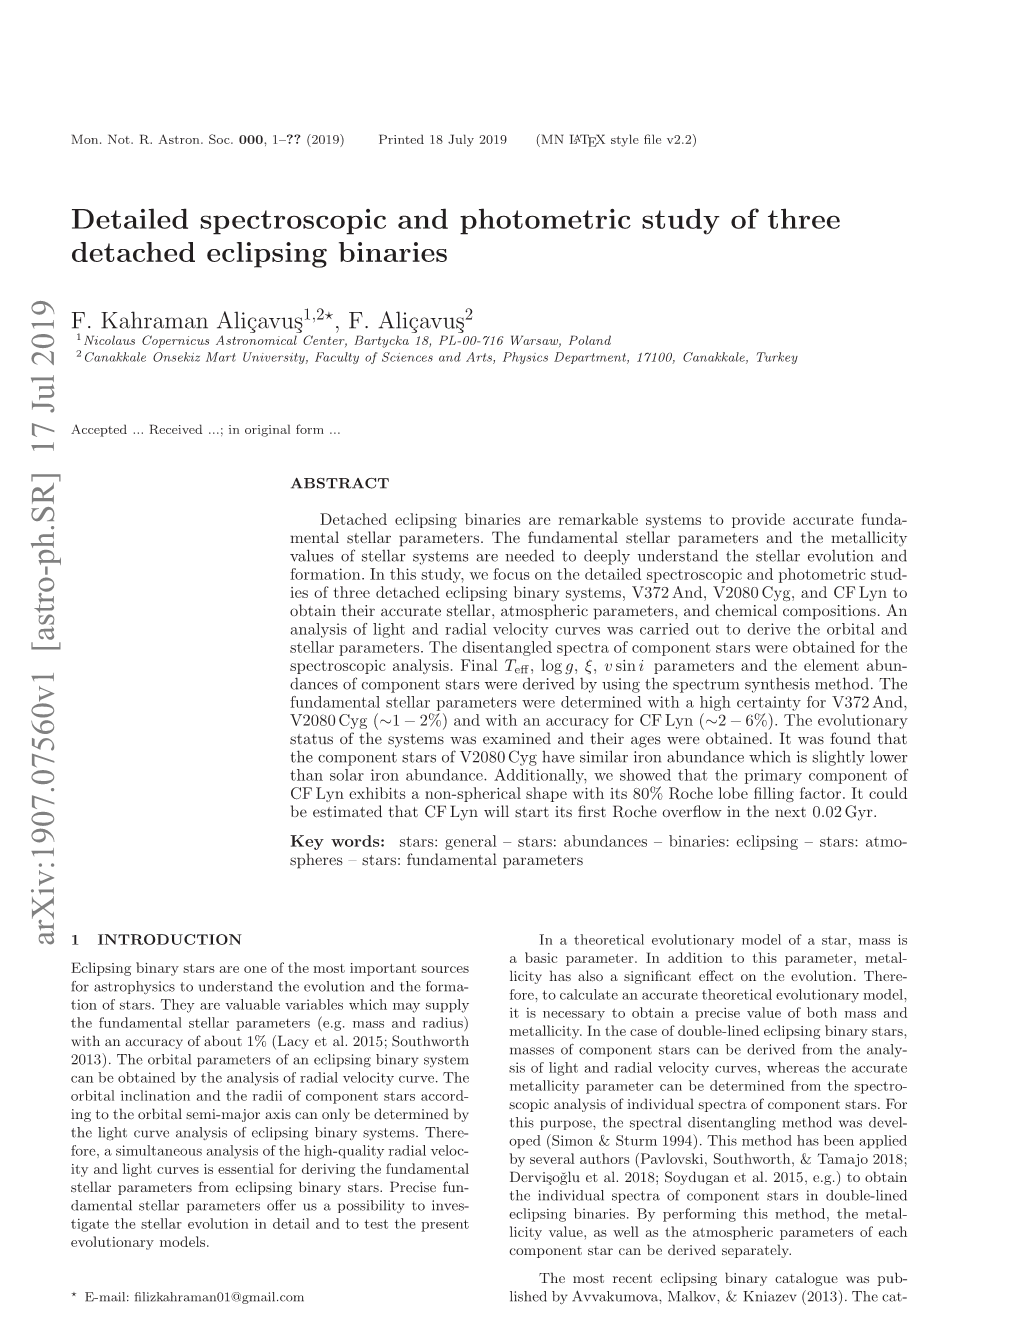 Detailed Spectroscopic and Photometric Study of Three Detached